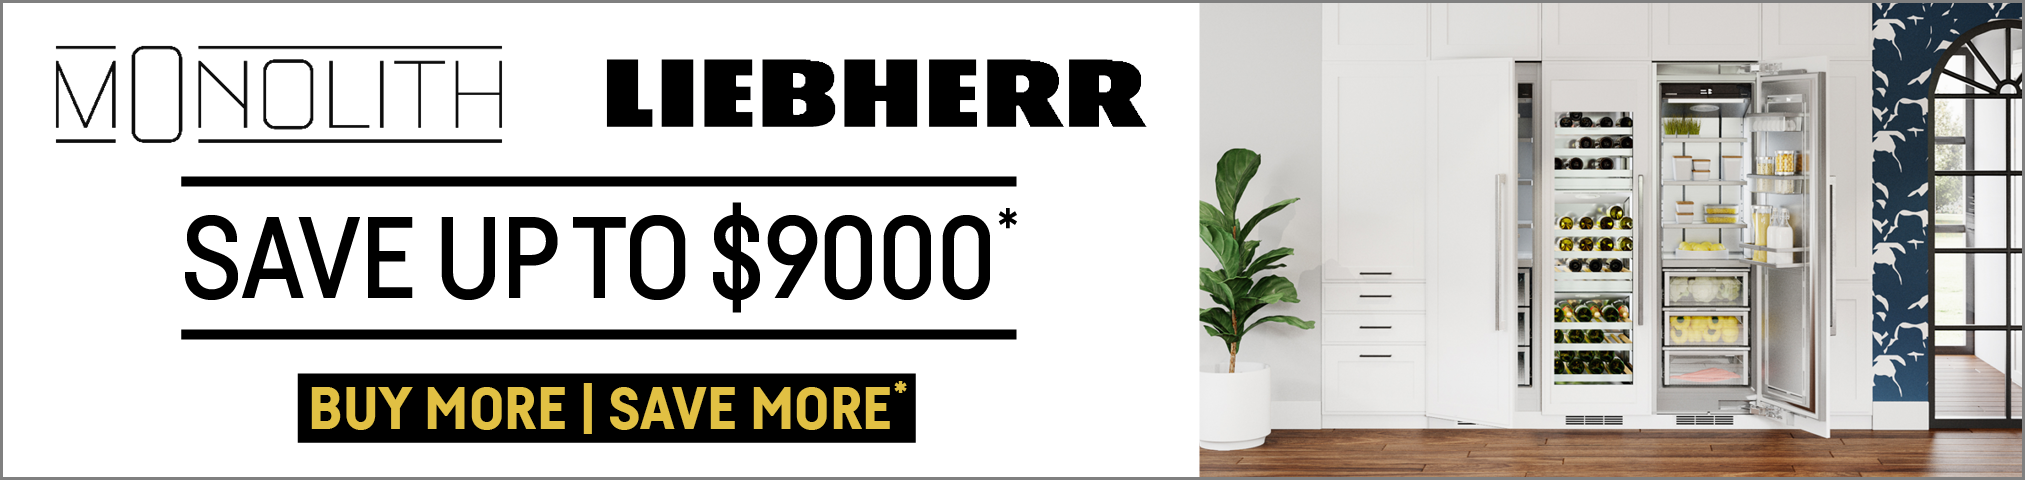 Save Up To $9,000* On Eligible Liebherr Monolith Products